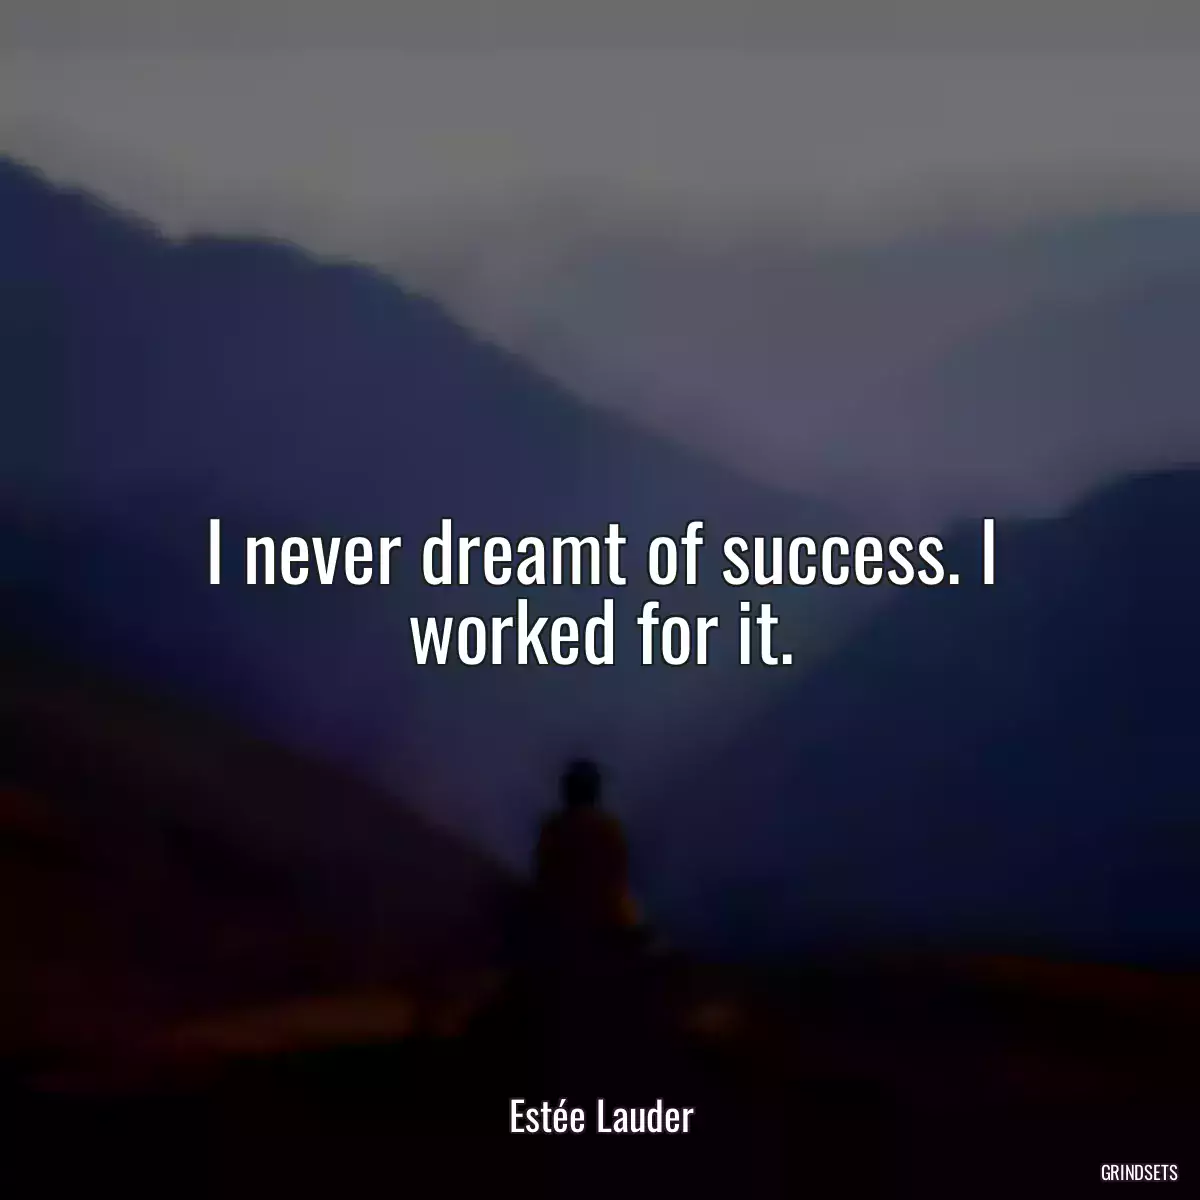 I never dreamt of success. I worked for it.